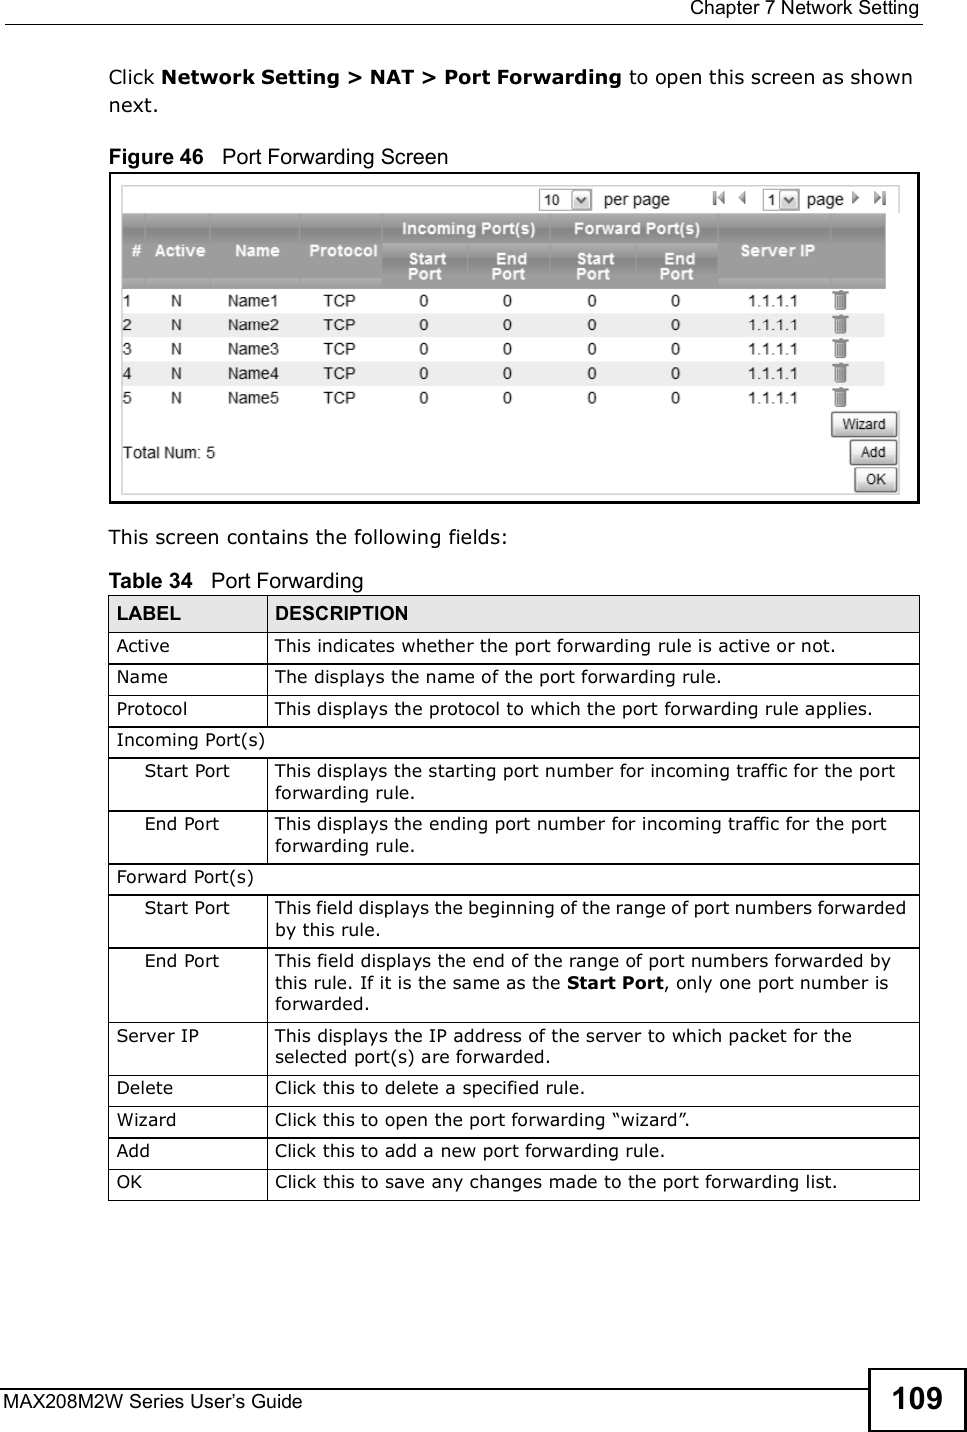  Chapter 7Network SettingMAX208M2W Series User s Guide 109Click Network Setting &gt; NAT &gt; Port Forwarding to open this screen as shown next.Figure 46   Port Forwarding ScreenThis screen contains the following fields:Table 34   Port ForwardingLABEL DESCRIPTIONActiveThis indicates whether the port forwarding rule is active or not.NameThe displays the name of the port forwarding rule.ProtocolThis displays the protocol to which the port forwarding rule applies.Incoming Port(s)Start PortThis displays the starting port number for incoming traffic for the port forwarding rule.End PortThis displays the ending port number for incoming traffic for the port forwarding rule.Forward Port(s)Start Port This field displays the beginning of the range of port numbers forwarded by this rule.End Port This field displays the end of the range of port numbers forwarded by this rule. If it is the same as the Start Port, only one port number is forwarded.Server IPThis displays the IP address of the server to which packet for the selected port(s) are forwarded.DeleteClick this to delete a specified rule.WizardClick this to open the port forwarding &quot;wizard#.AddClick this to add a new port forwarding rule.OKClick this to save any changes made to the port forwarding list.